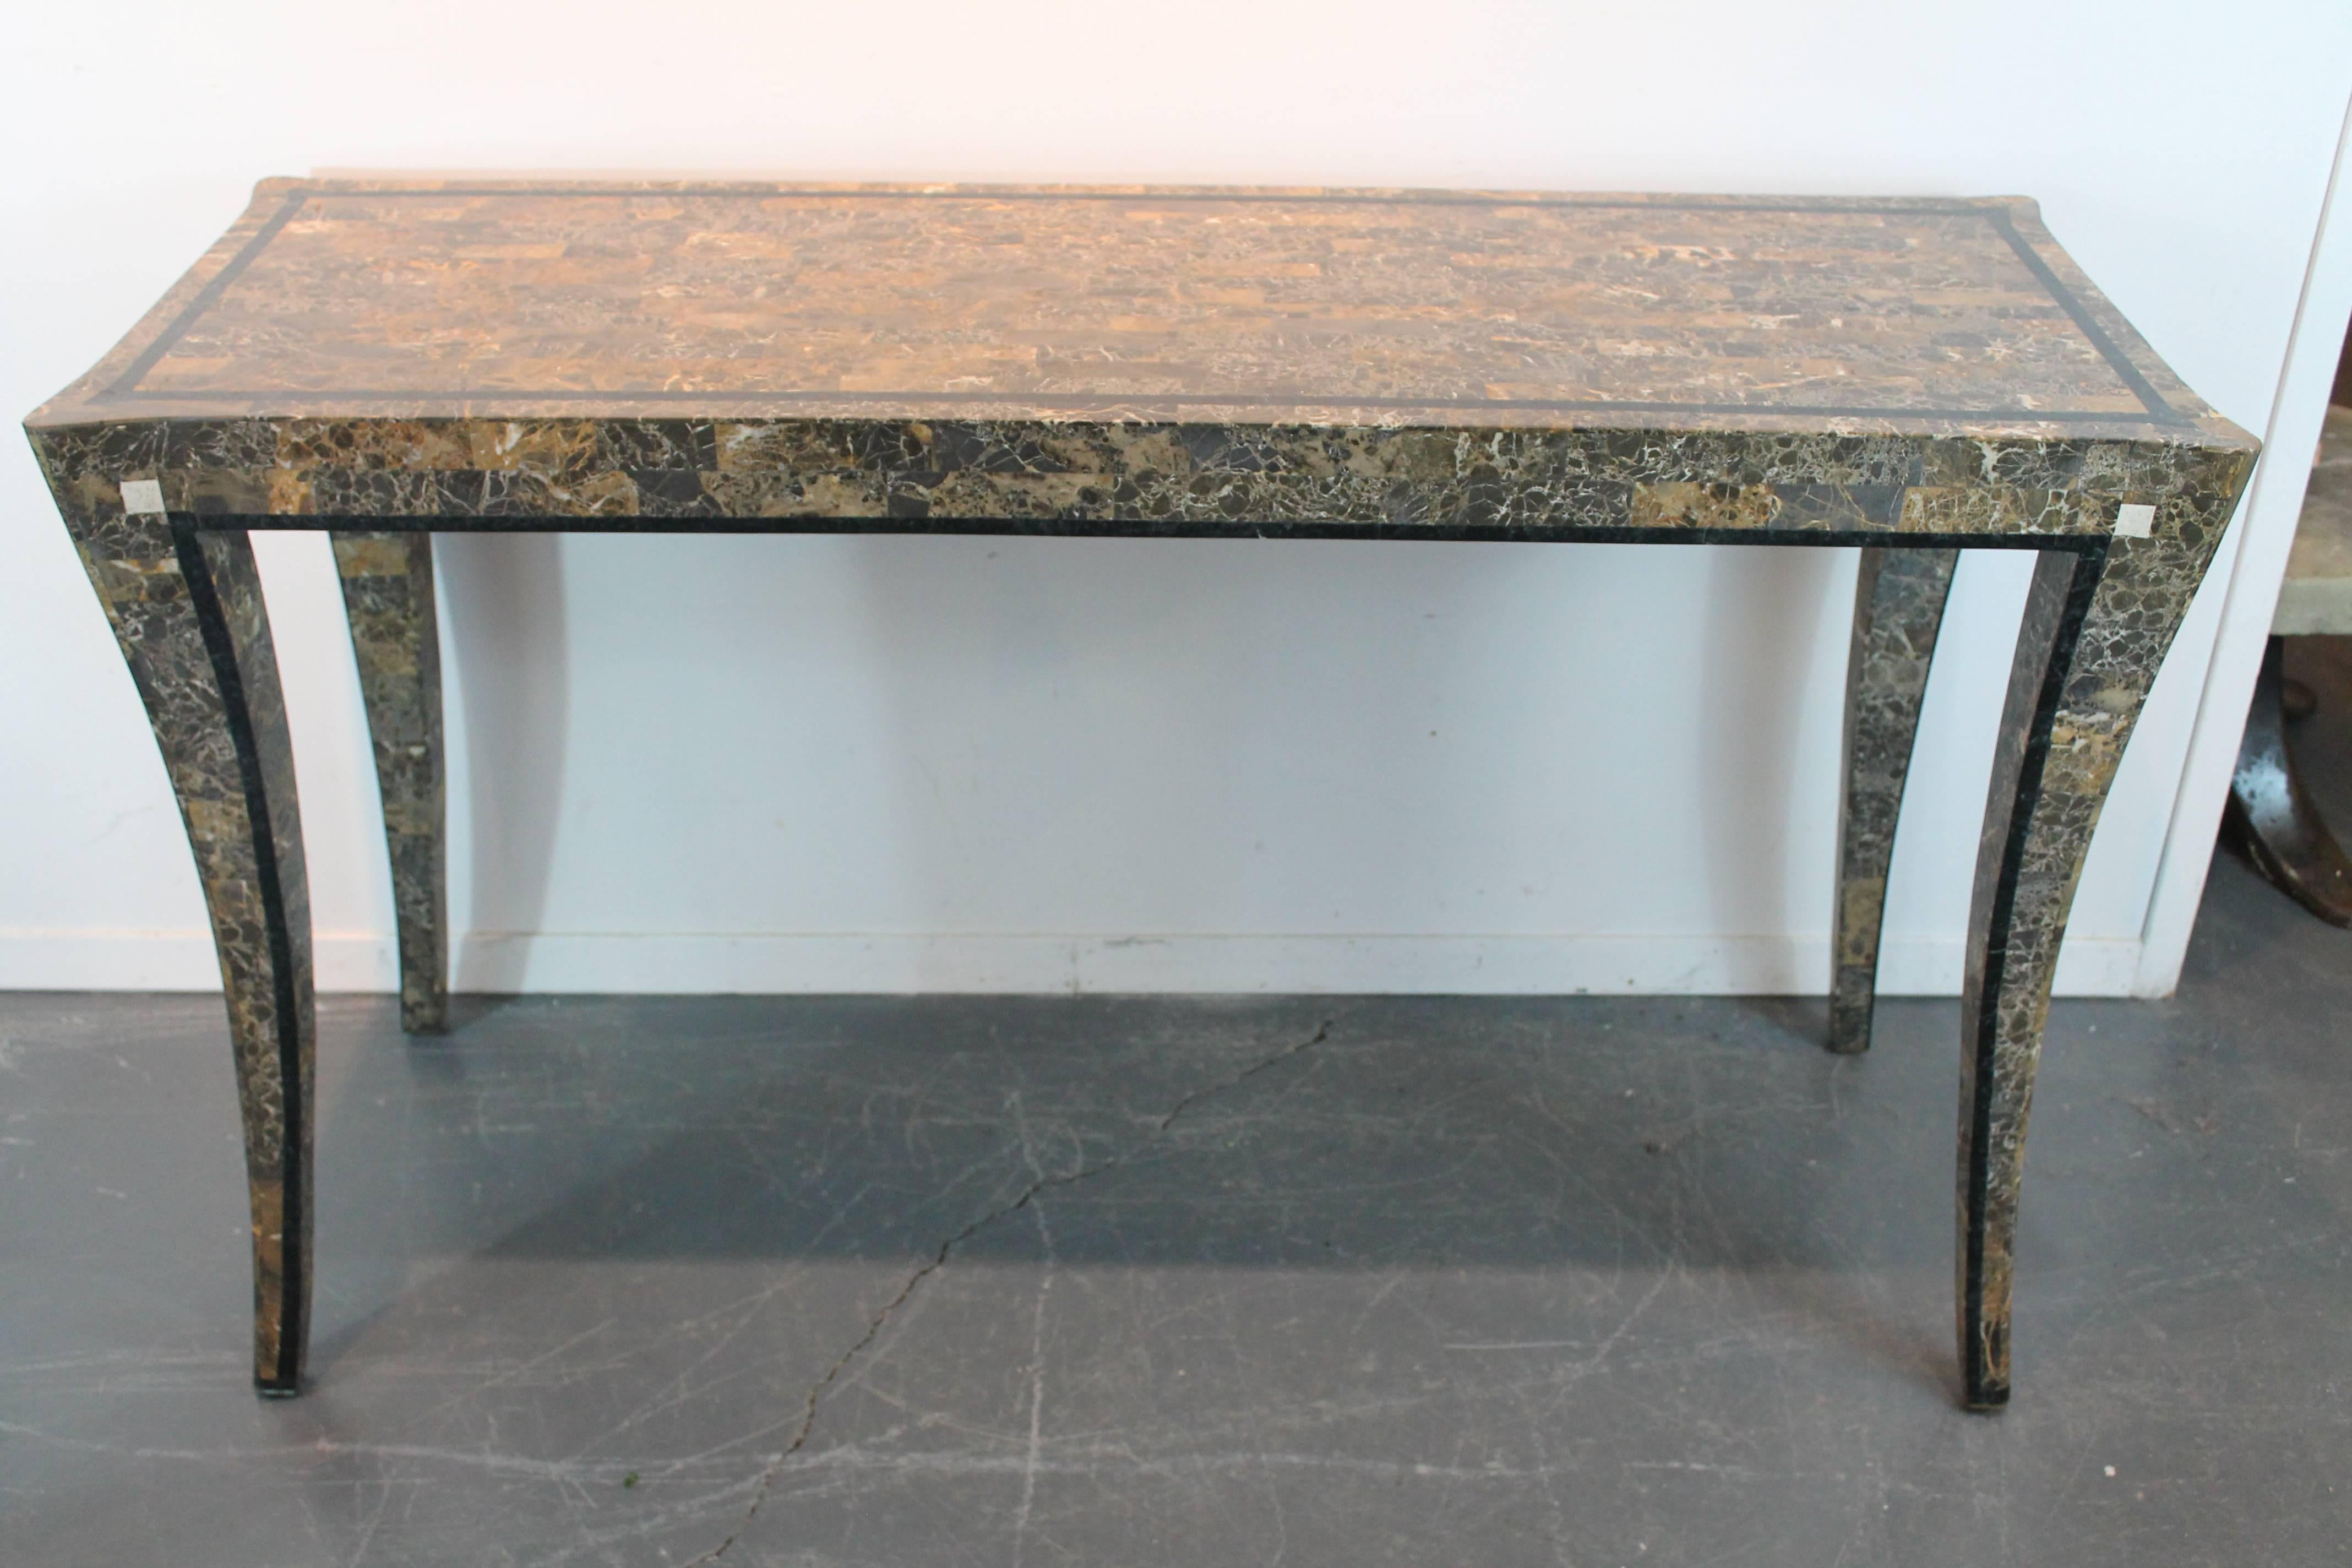 Remarkably elegant lines and exceptional attention to detail in this tessellated marble console table by Maitland-Smith.